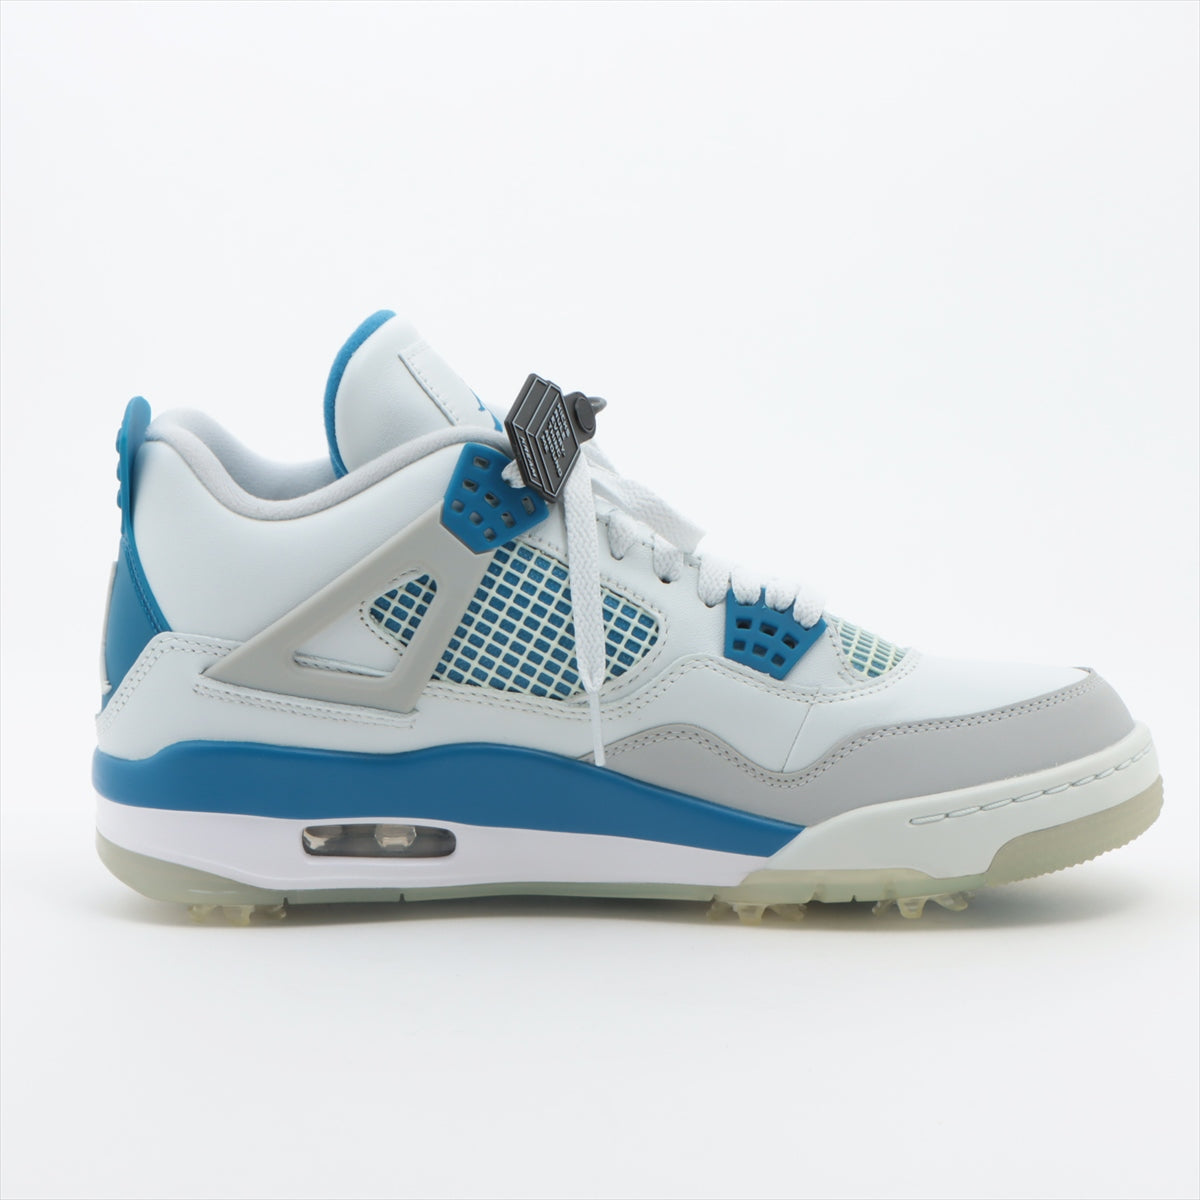 Nike Leather Sneakers 28㎝ Men's Blue x white CU9981-101 AIR JORDAN 4 GOLF MILITARY BLUE There is a box